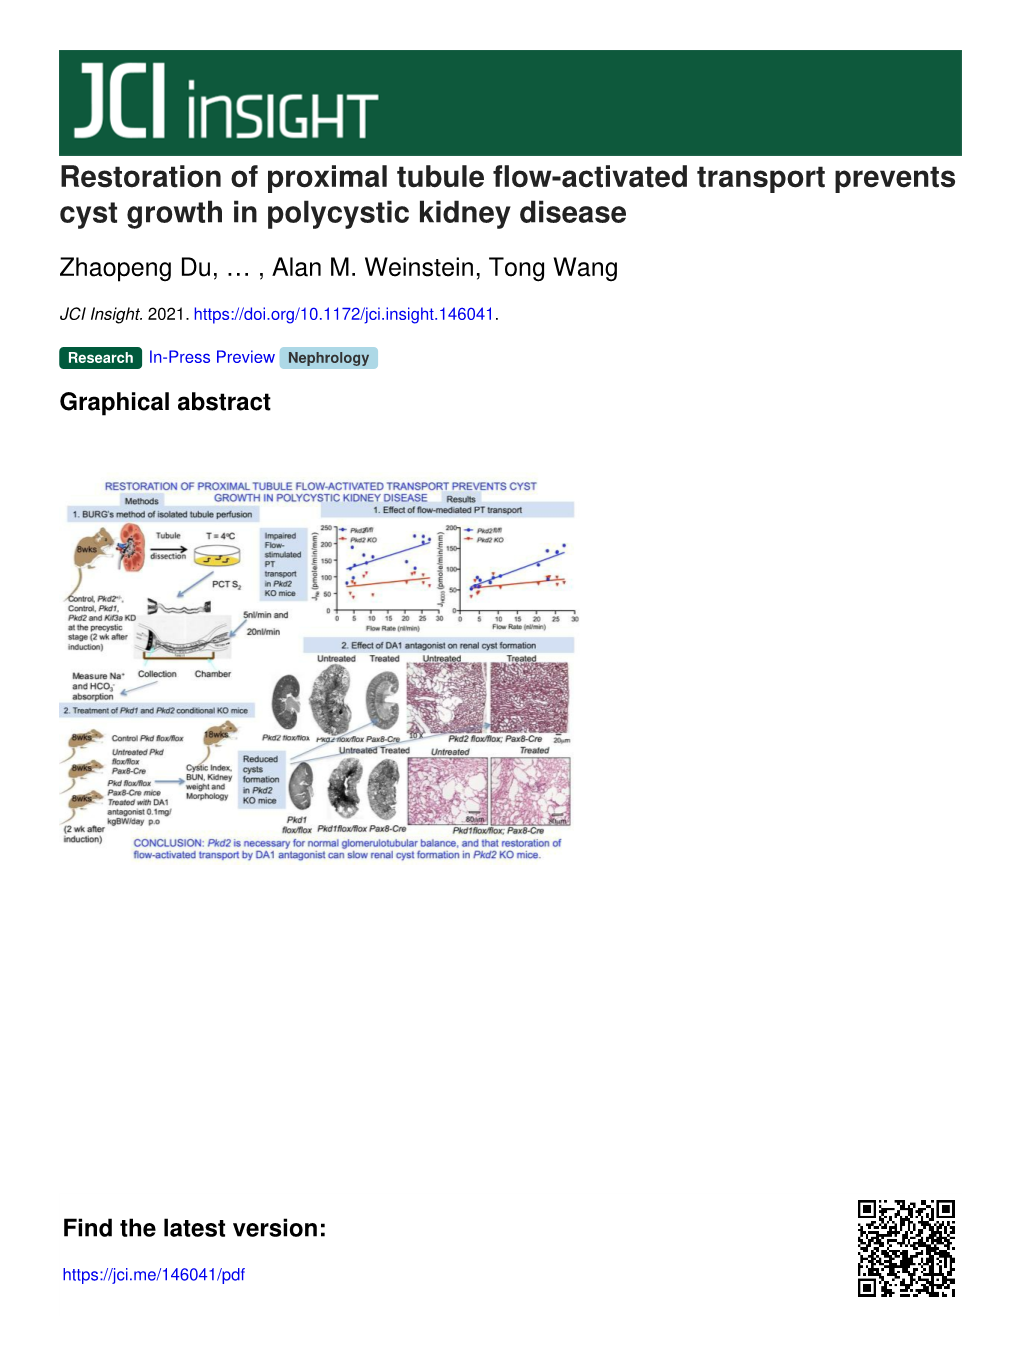 Restoration of Proximal Tubule Flow-Activated Transport Prevents Cyst Growth in Polycystic Kidney Disease